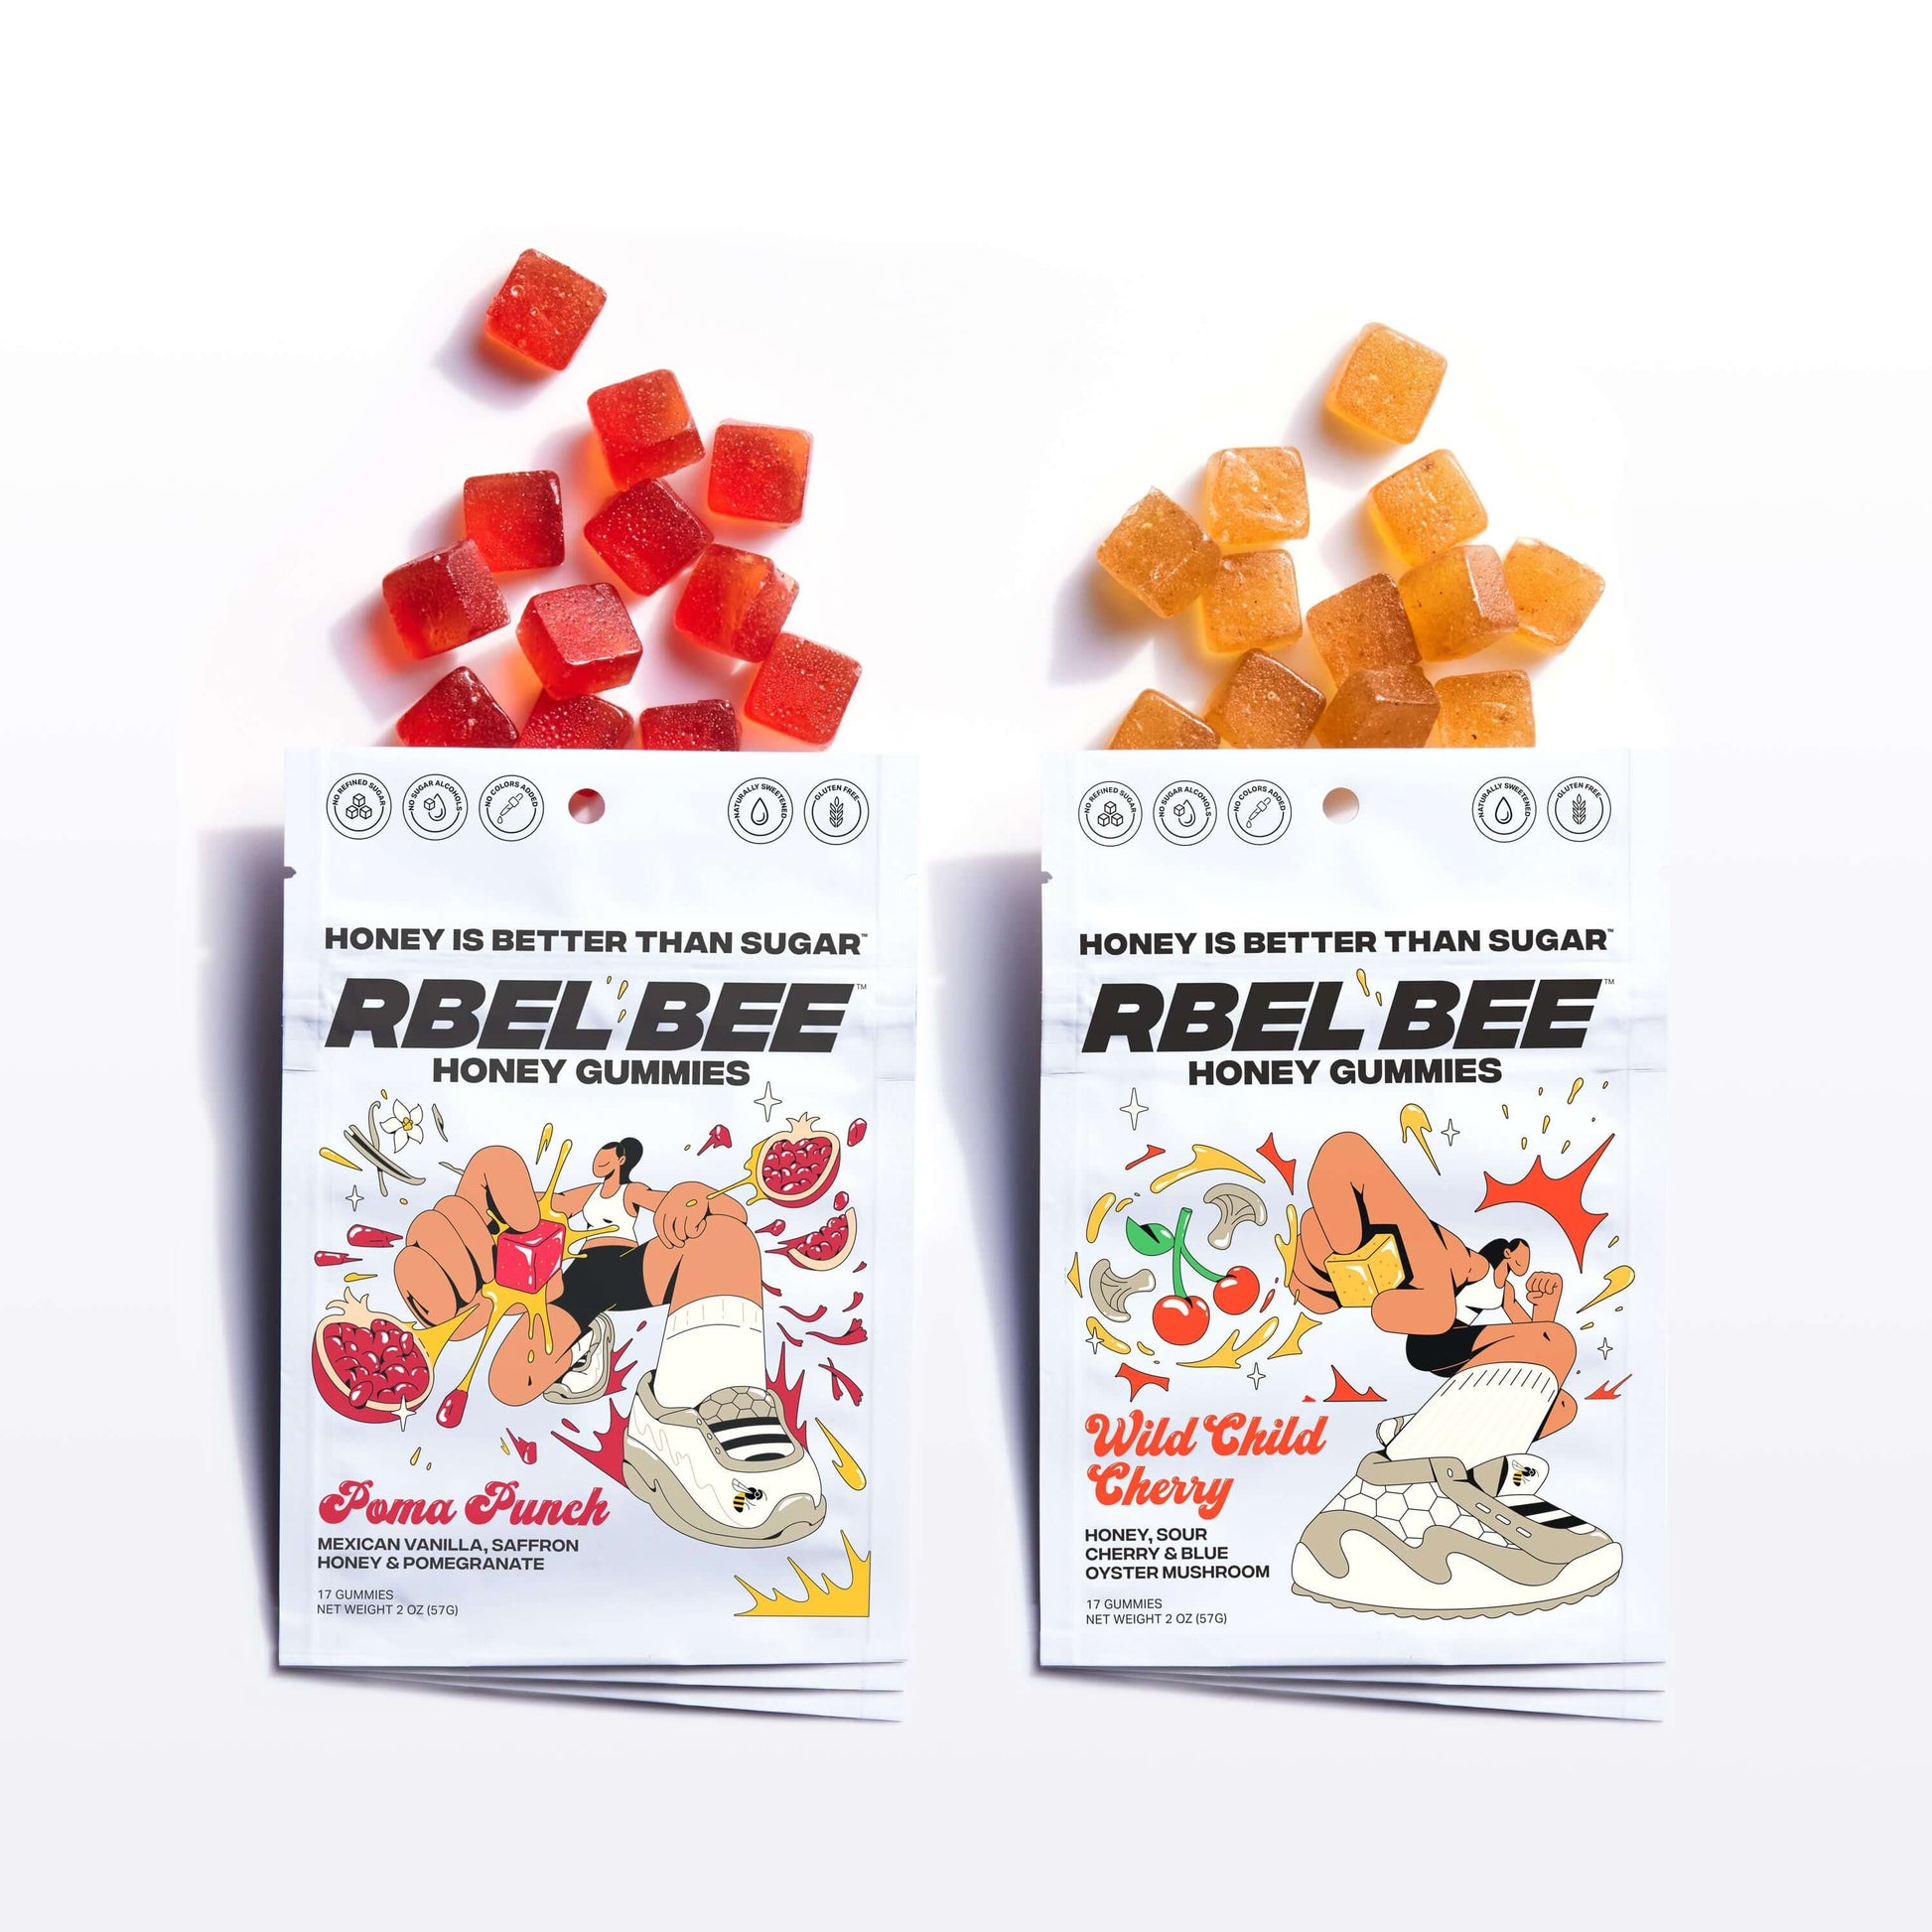 Mix It Up - Both Rbel Bee Honey Gummies flavors: Poma Punch and Wild Child Cherry